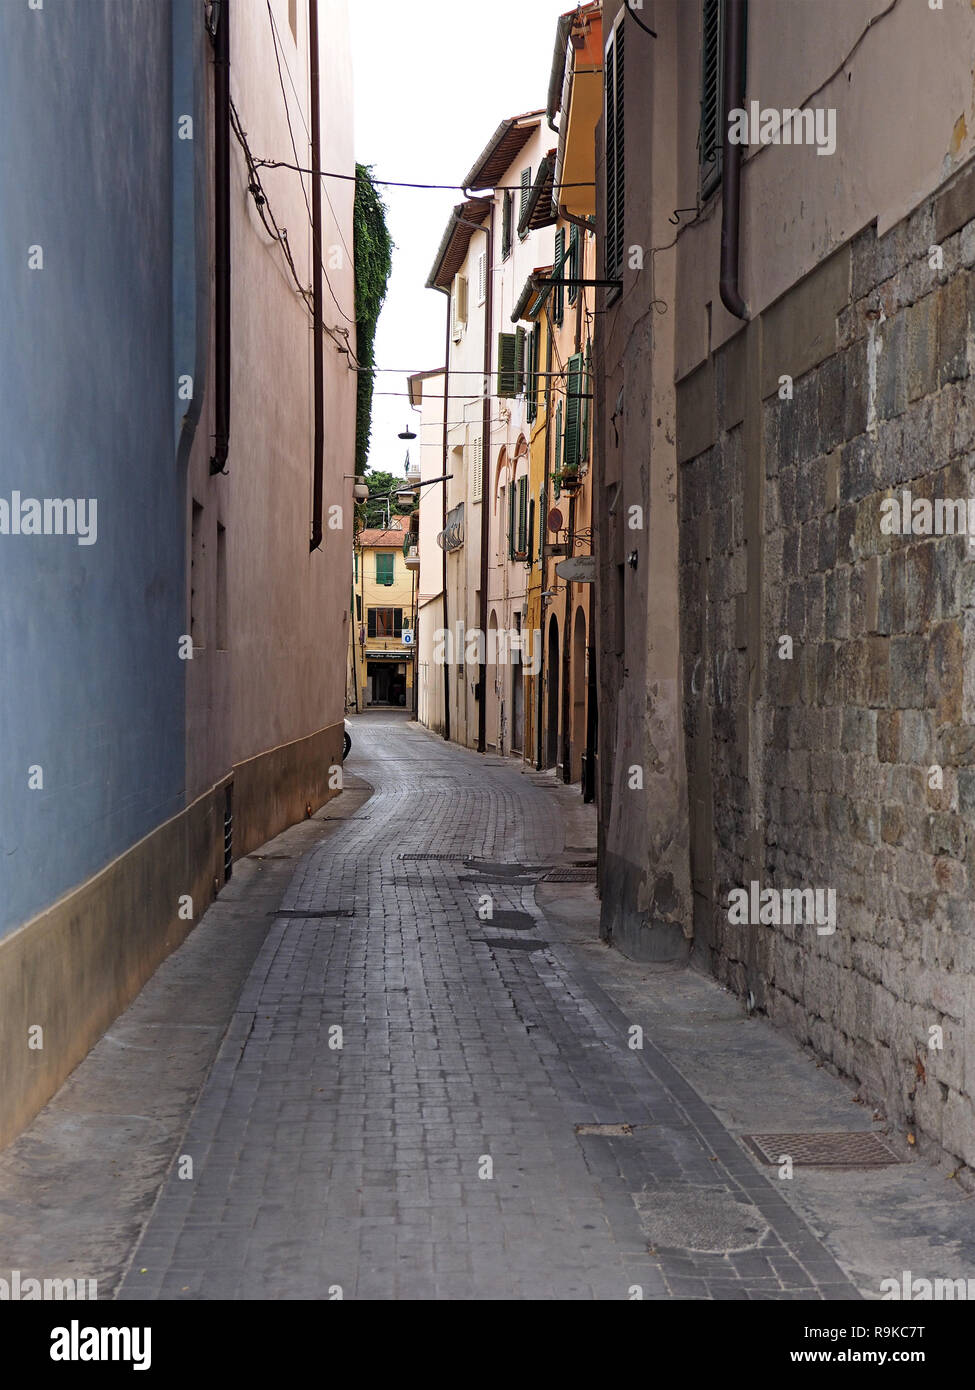 typical winding narrow Tuscan paved street in shadow with plain blue wall and stonework, downpipes and shuttered windows in Pisa, Italy Stock Photo